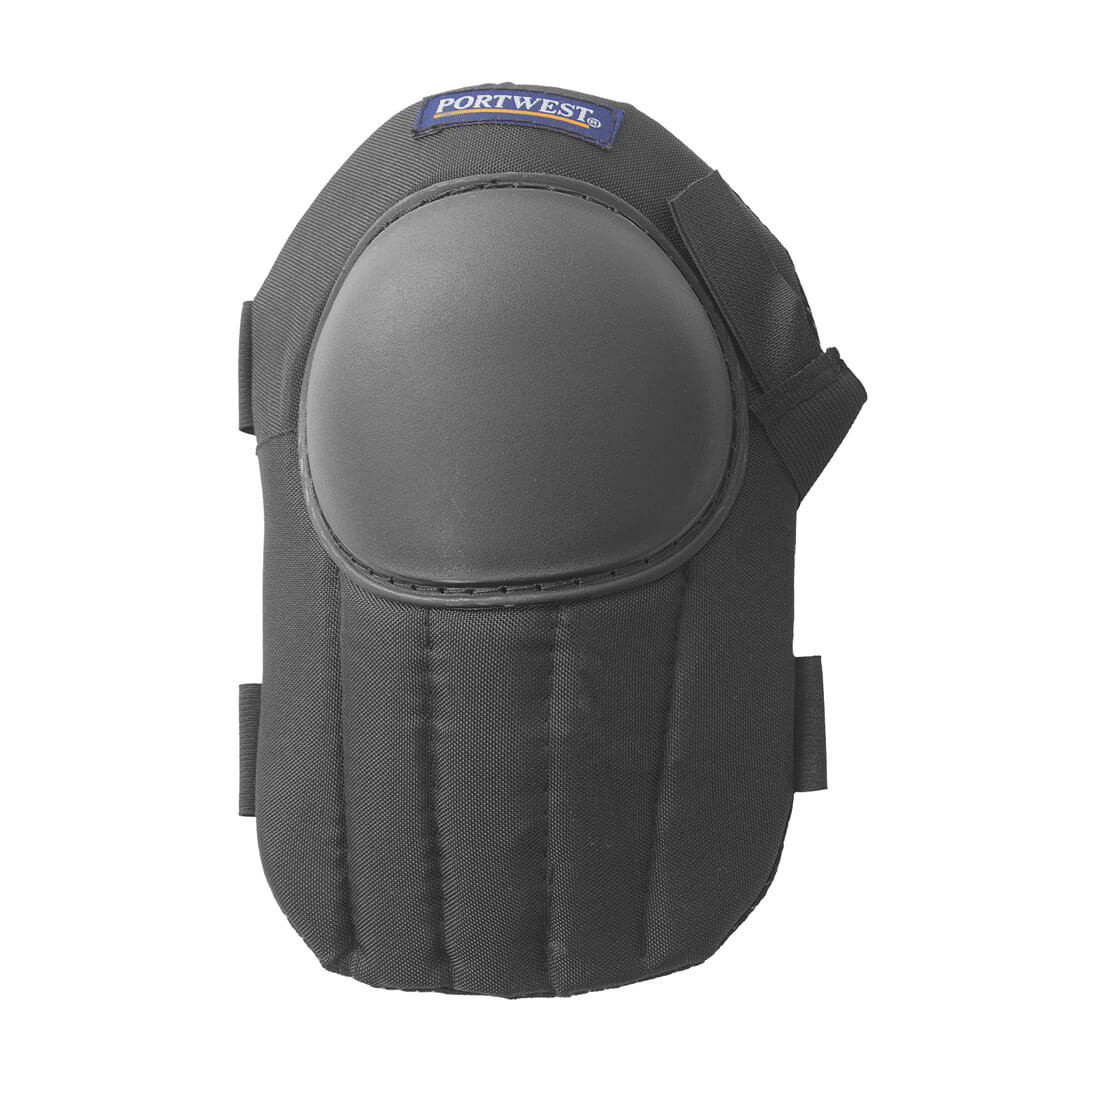 Lightweight Knee Pad - Personal protection